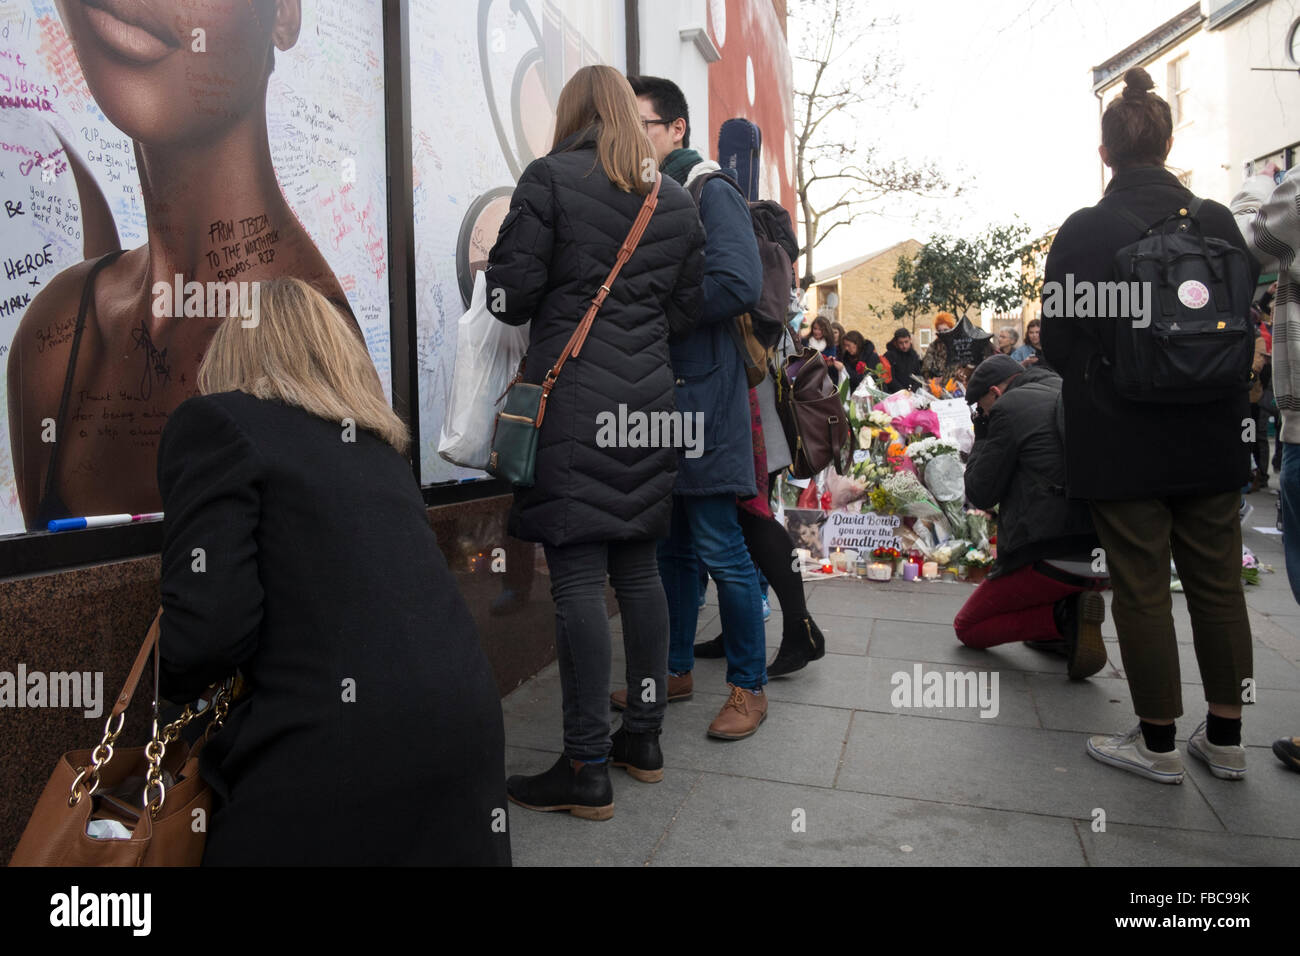 London, UK. 13th Jan, 2016. Fans pay tribute to David Bowie at a mural in Brixton where he was born. Jimmy C Graffiti. David Bowie  died of cancer at the age of 69 on January 10th 2016.  13/01/16 Credit:  claire doherty/Alamy Live News Stock Photo